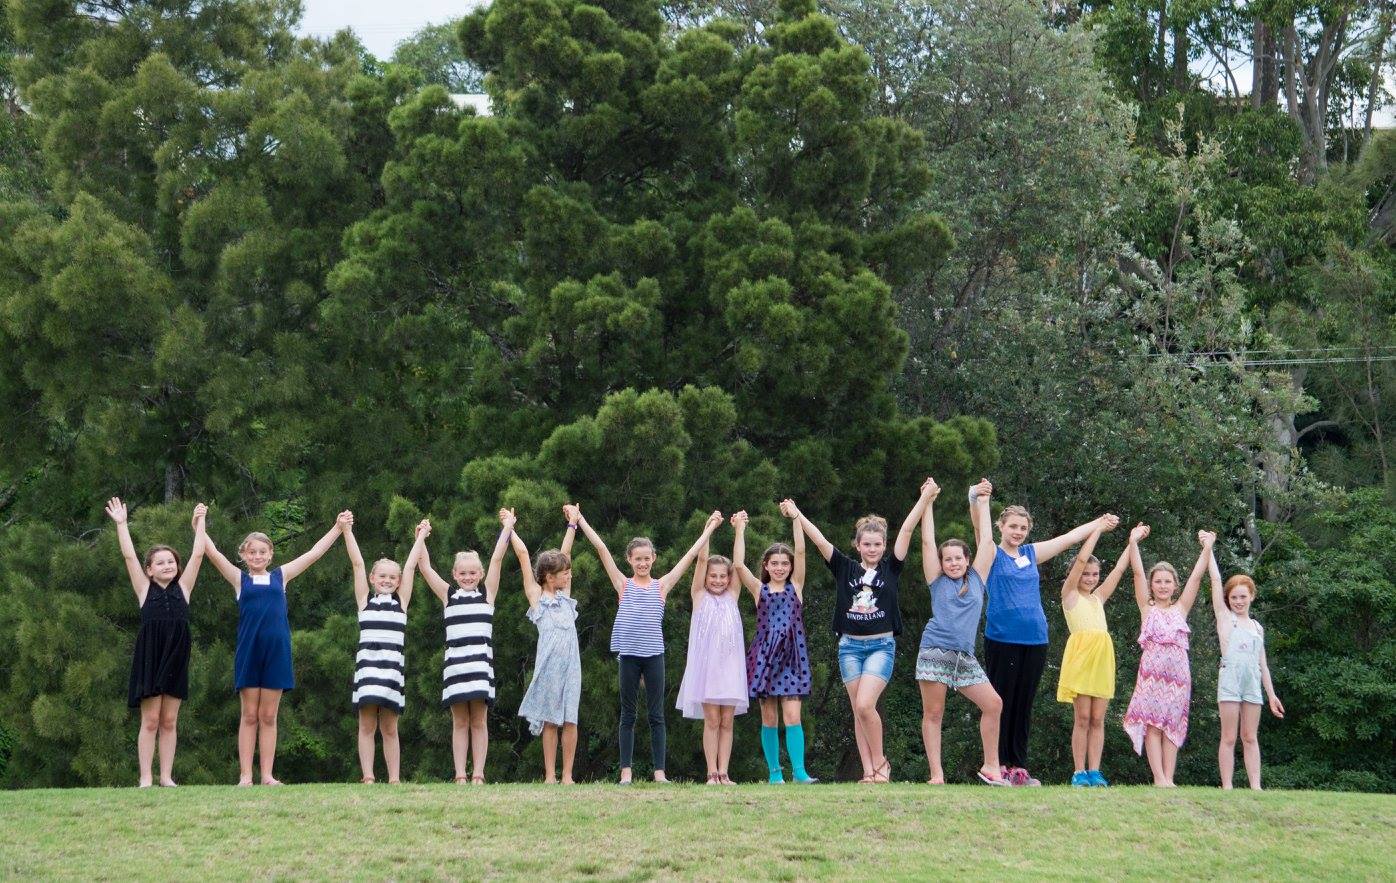 Moruya campaign builds strong girls and women, now and for future